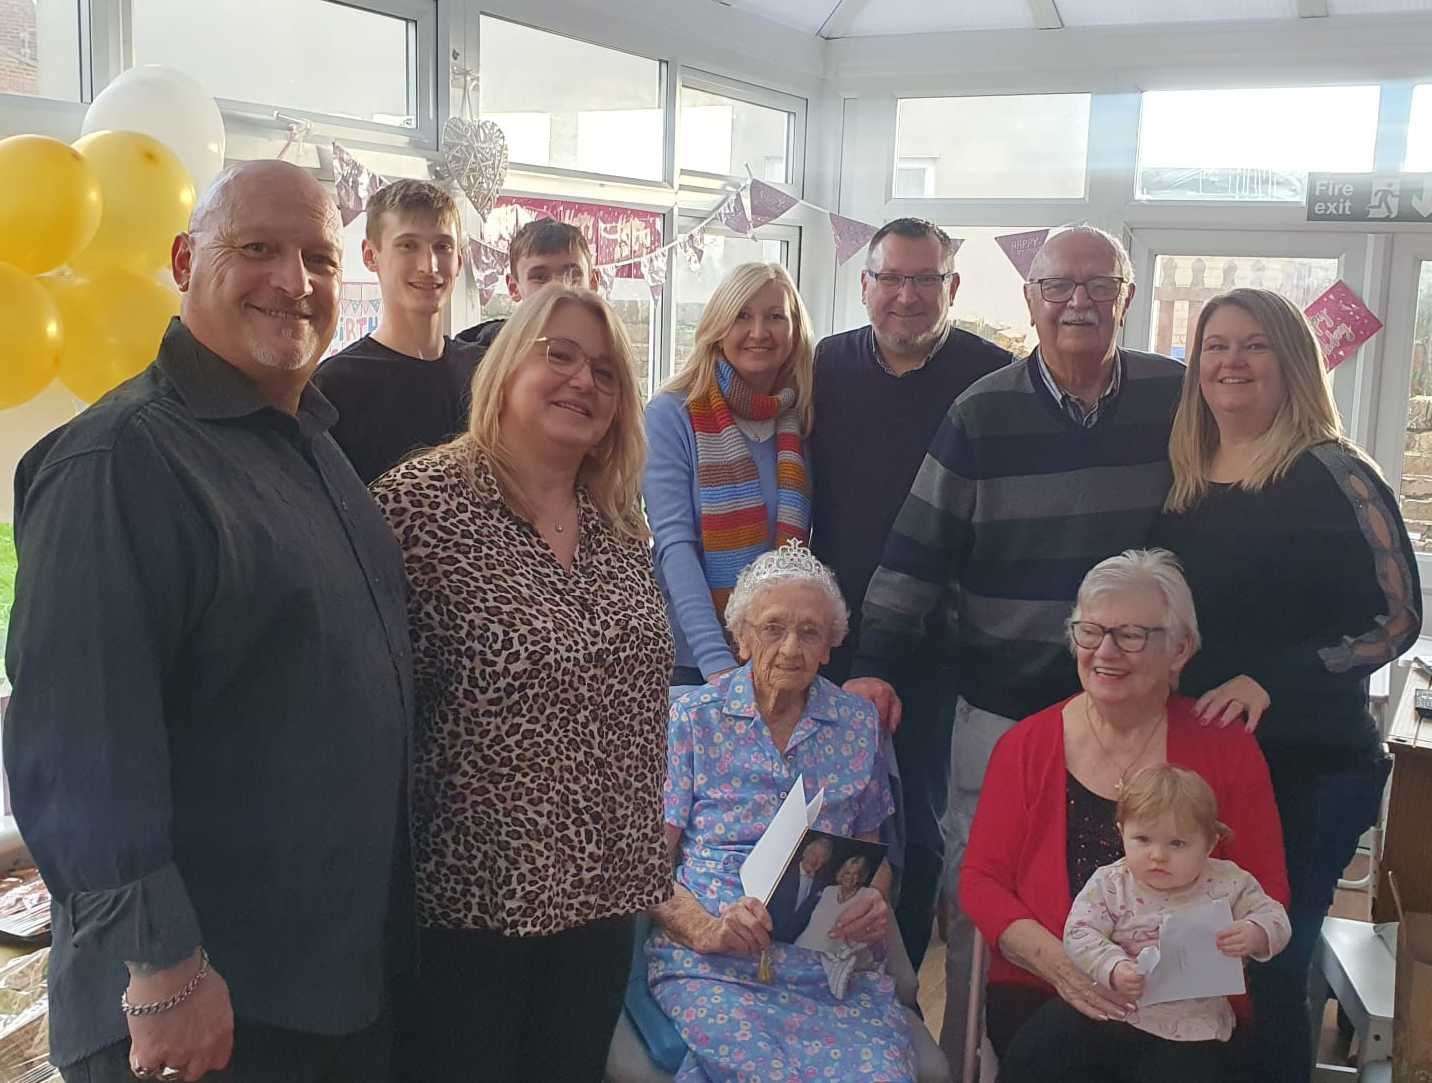 Doris celebrated her 100th birthday surrounded by family and friends. Picture: Carline Telford